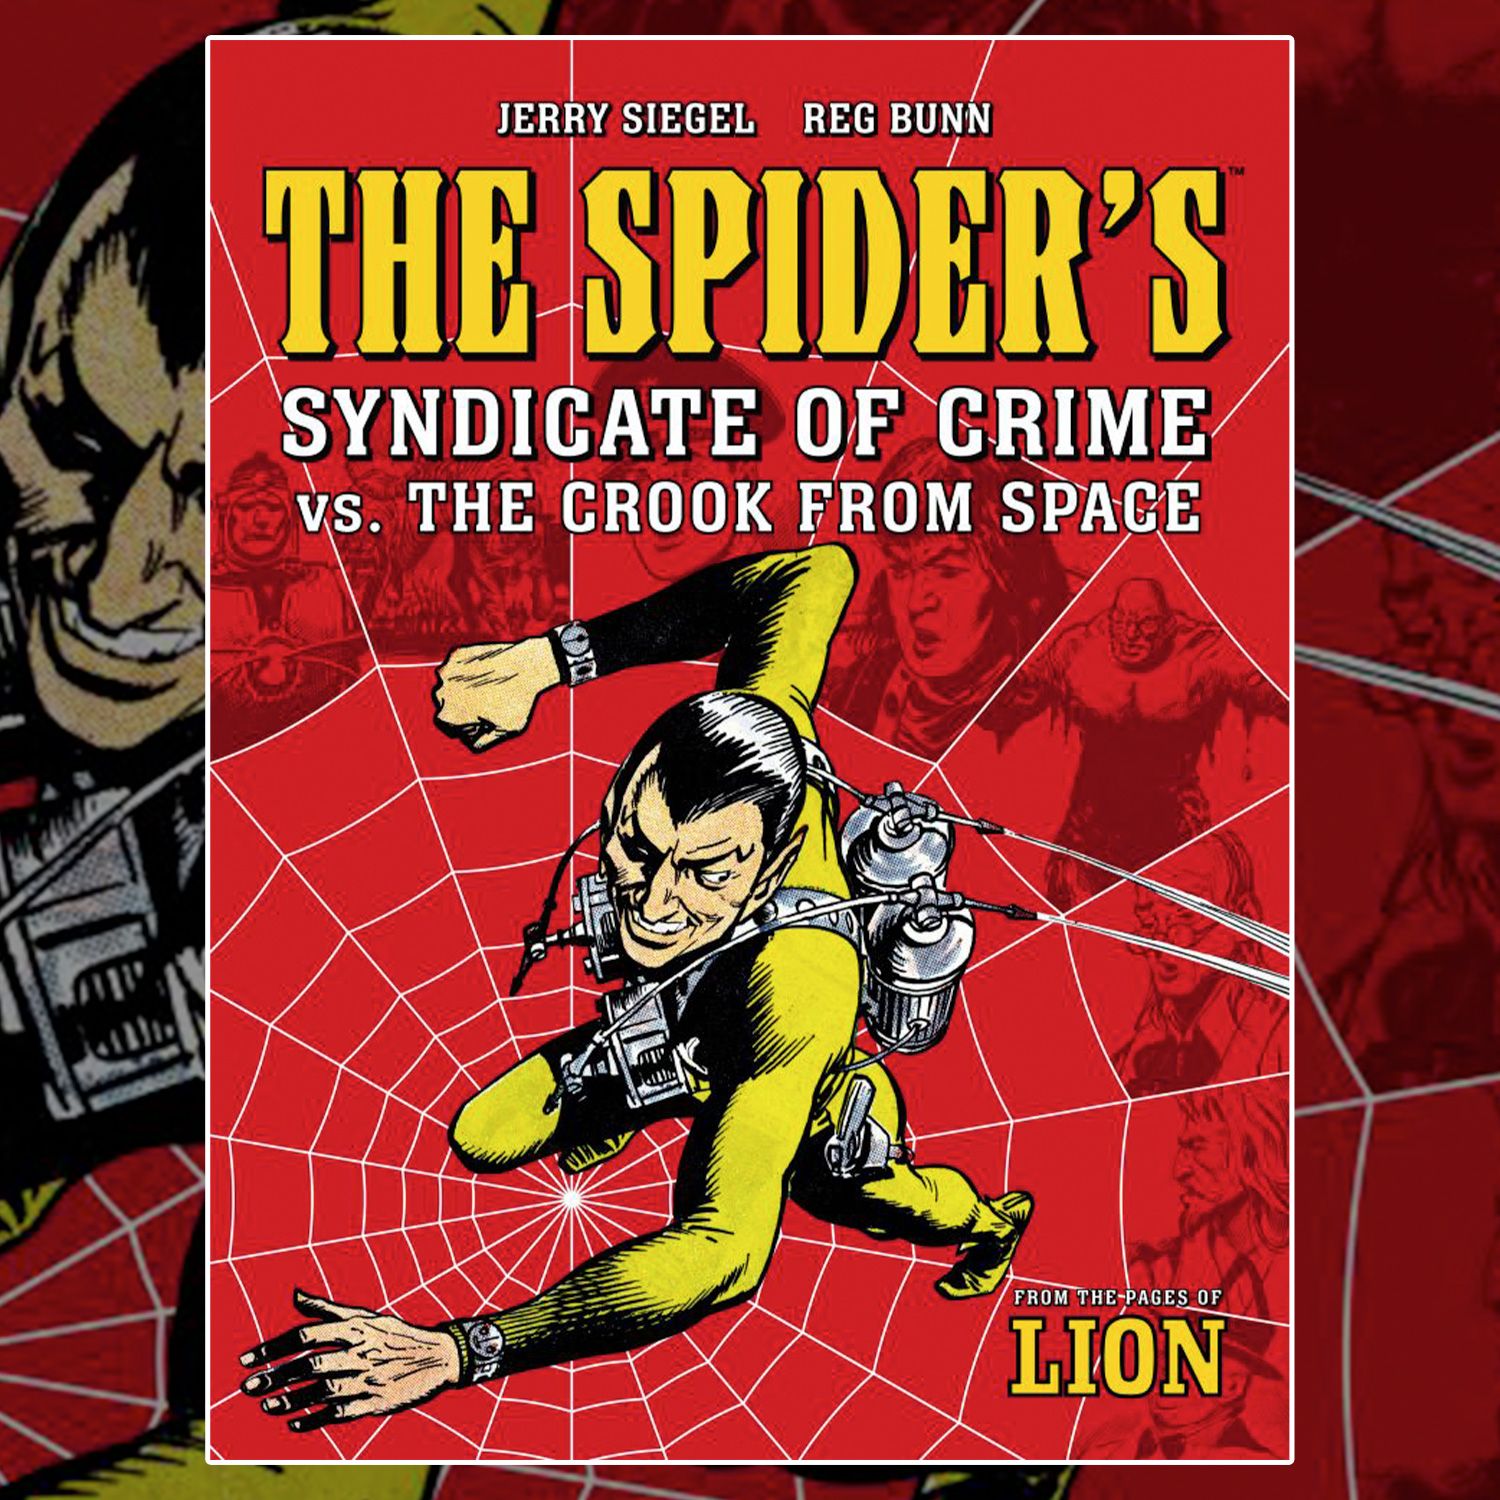 The king of crime is back – Jerry Siegel’s The Spider vs The Crook From Space!